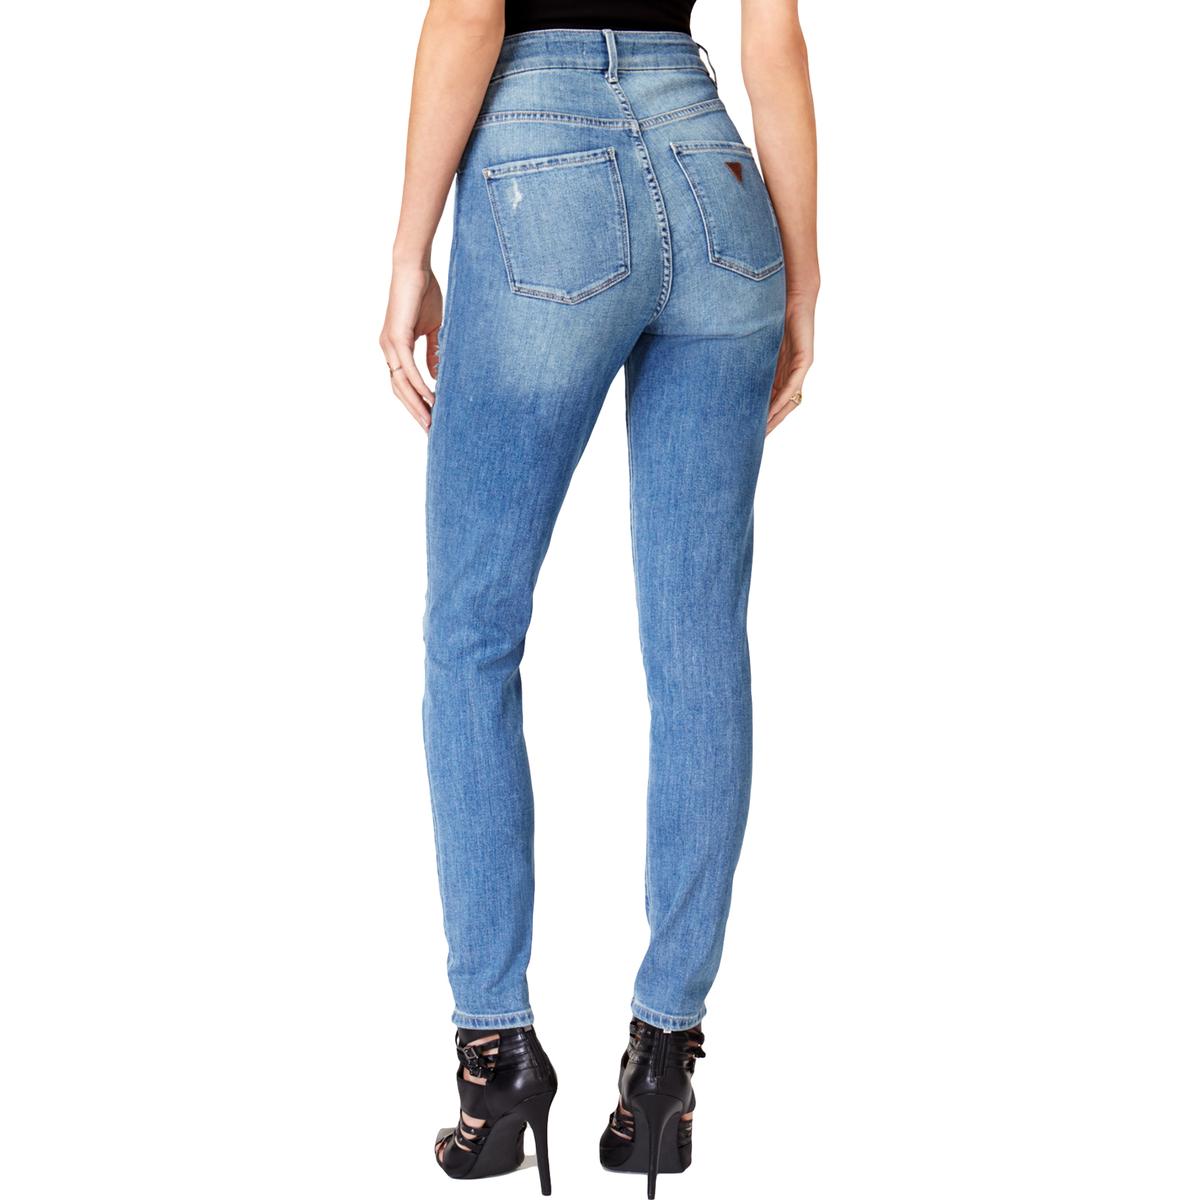 Guess Womens Blue Denim Destroyed High Rise Skinny Jeans 28 BHFO 1880 ...